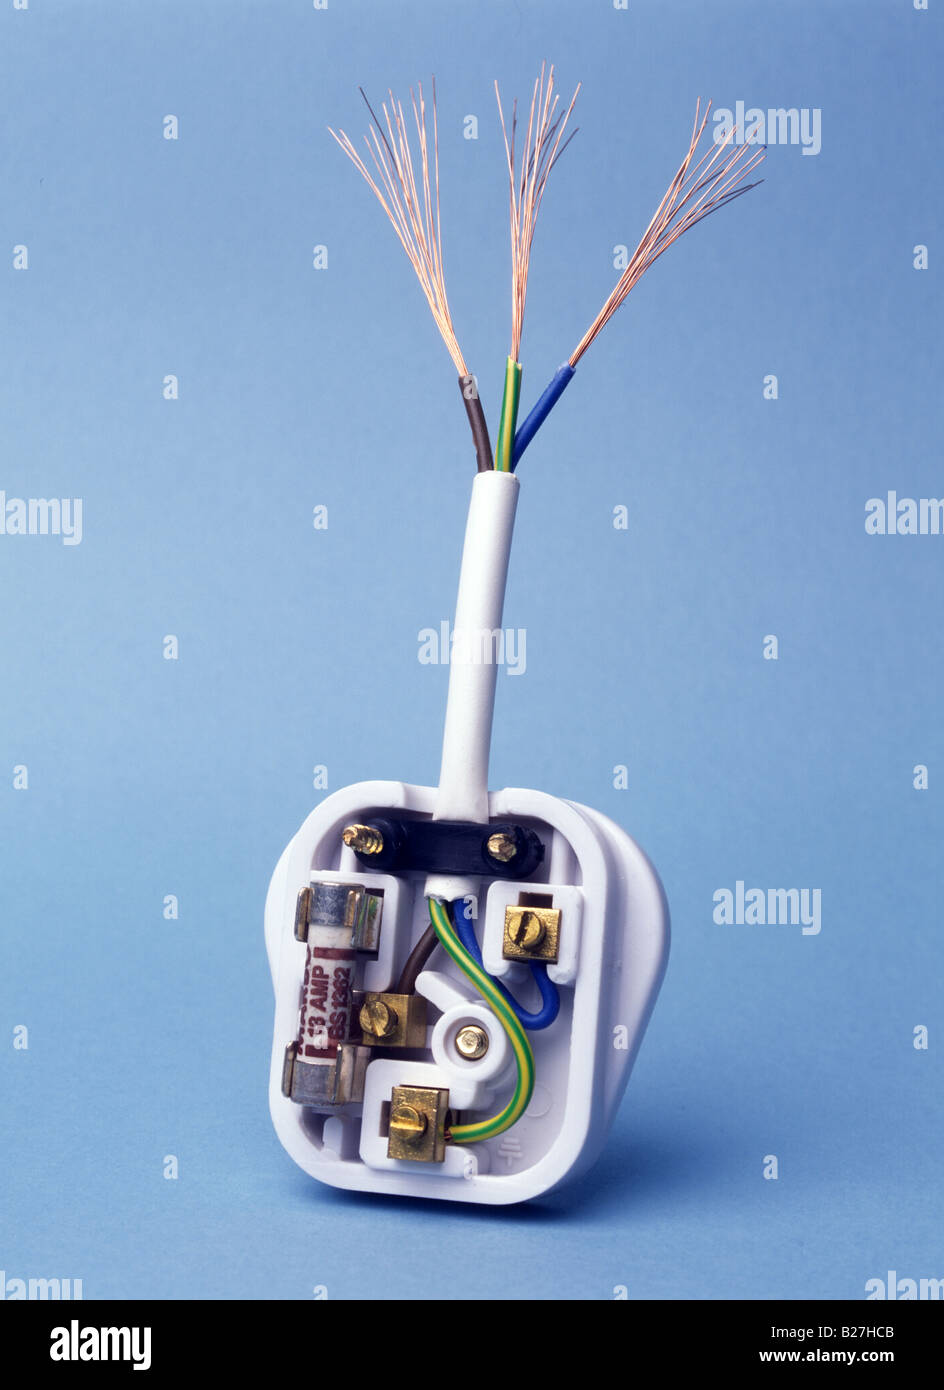 3 pin plug UK type showing copper wires and insulation blue neutral brown  live green and yellow earth on blue background Stock Photo - Alamy